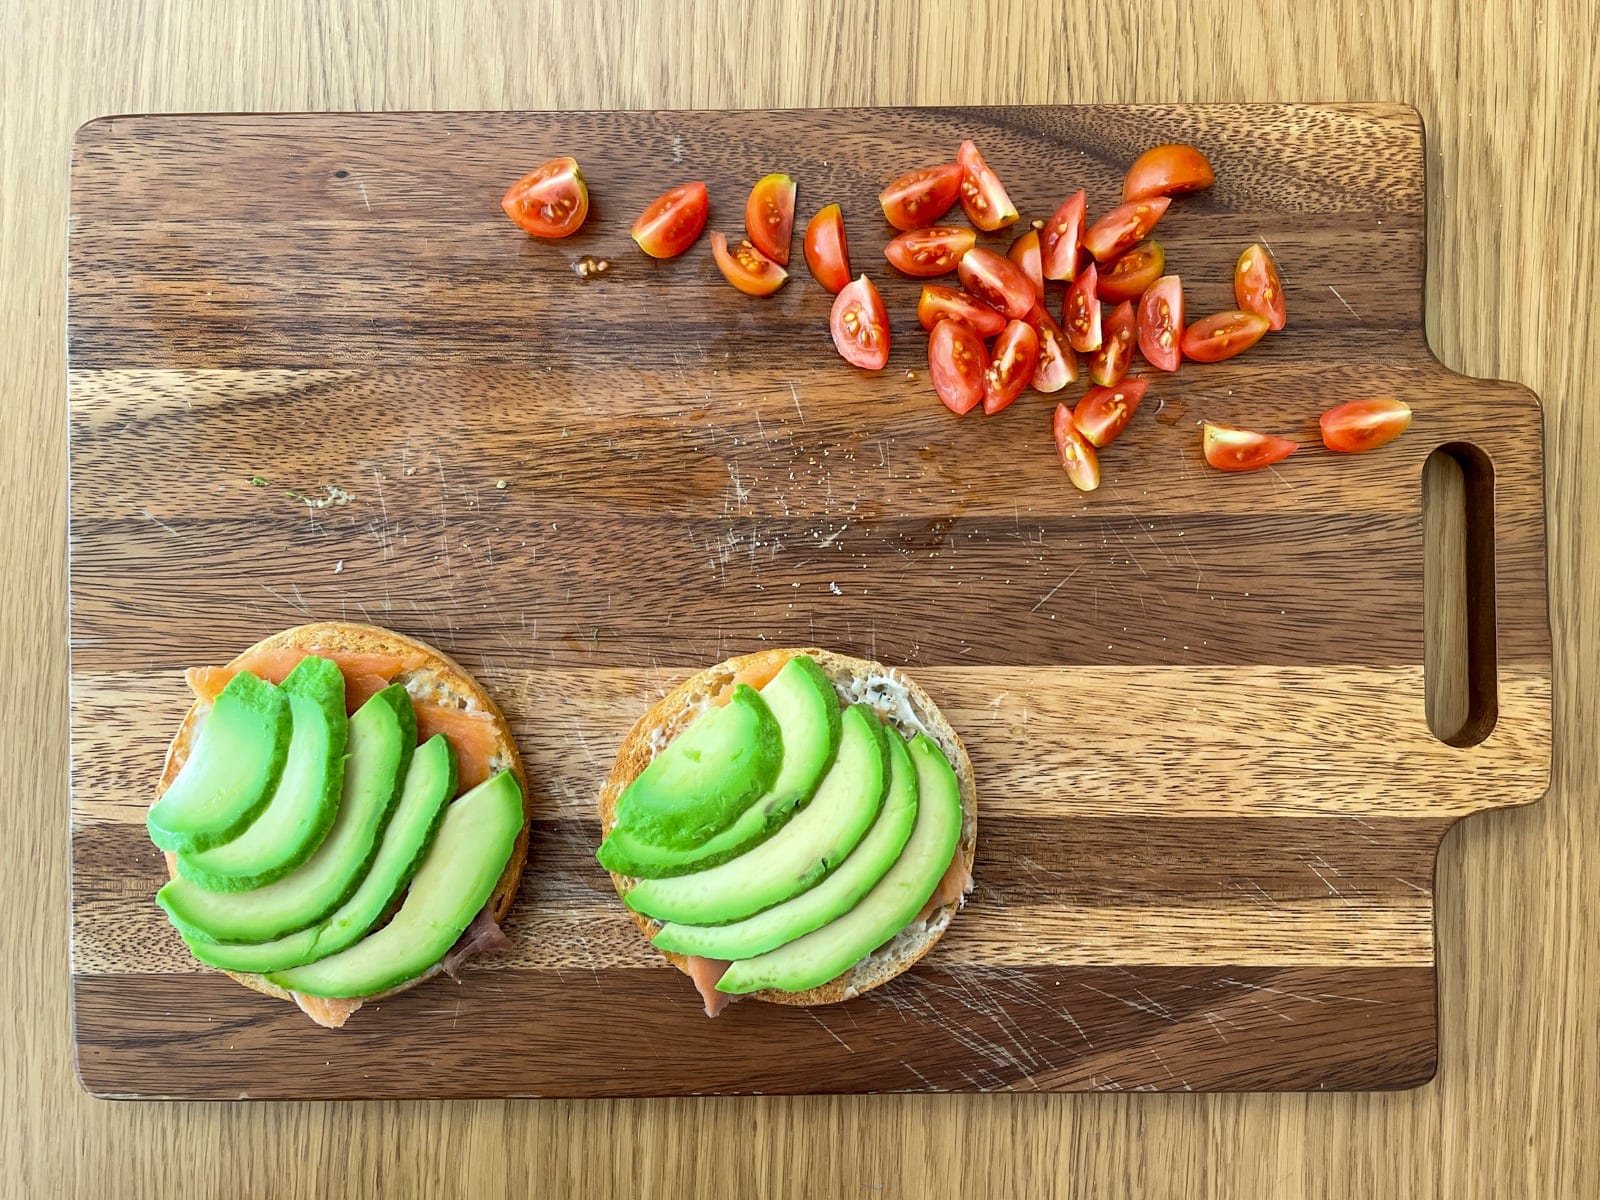 A wooden chopping board laid out with sliced cherry tomatoes and an open bagel with sliced avocado fanned out on top.